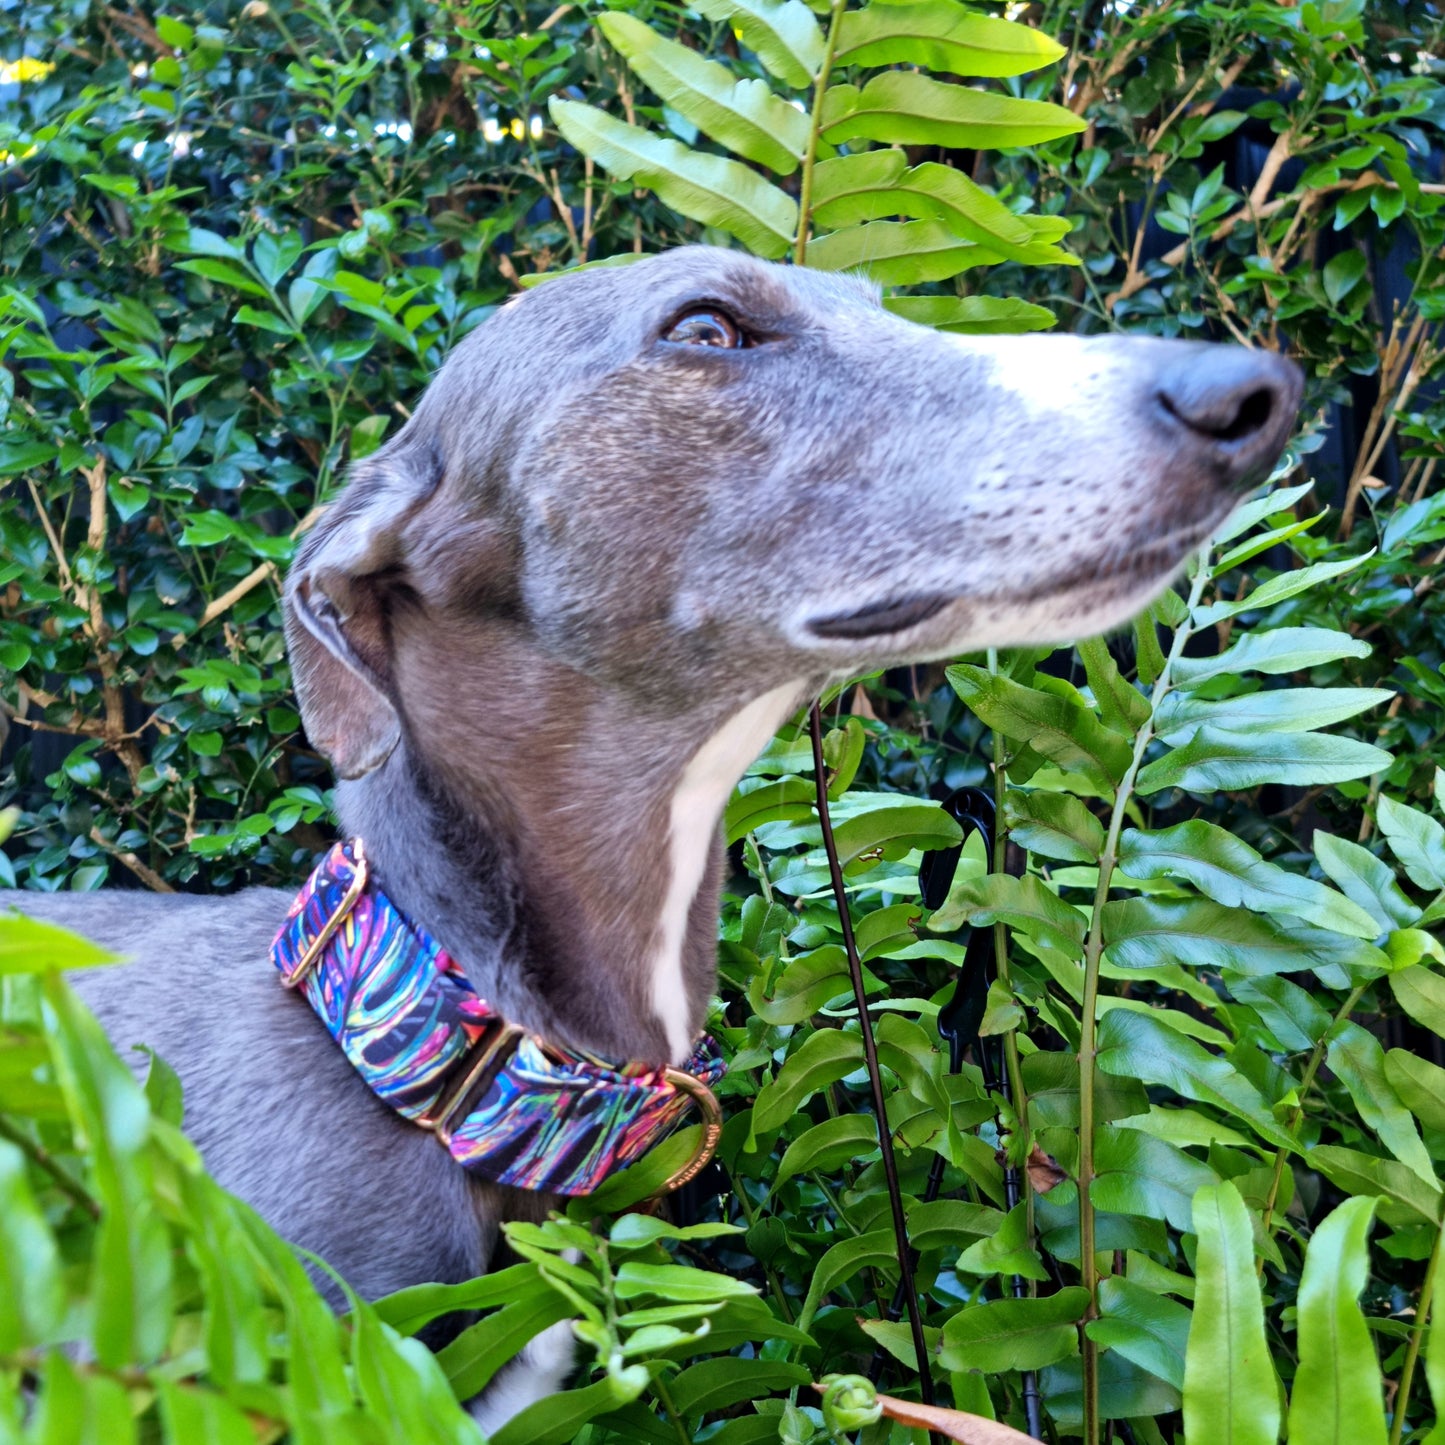 Lucid Leaves martingale collar - Water resistant